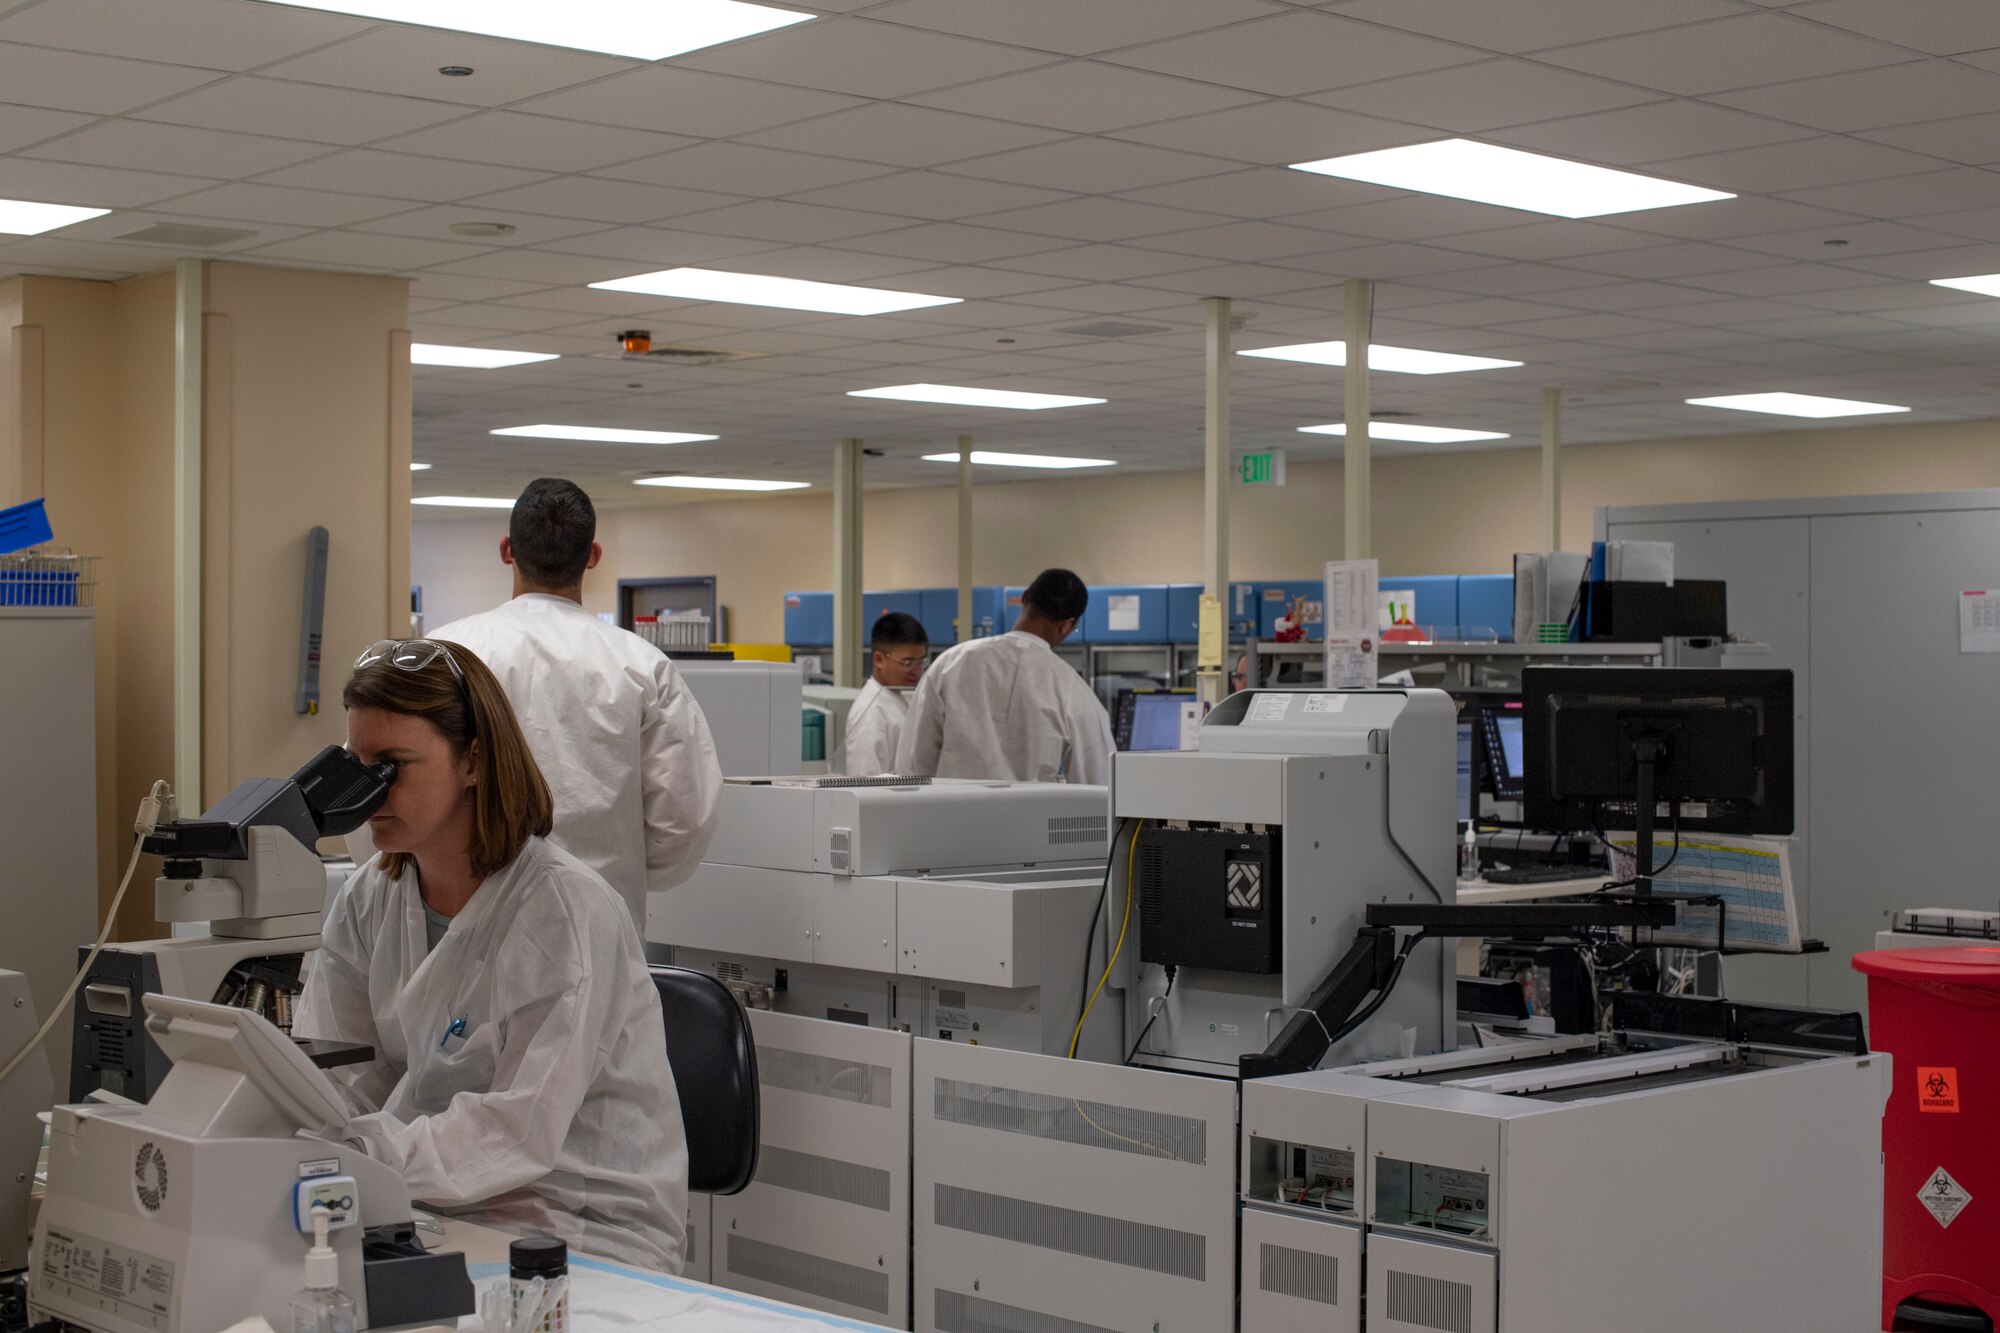 Airmen assigned to the 60th Medical and Diagnostics Therapeutic Squadron Laboratory, work routine operations April 4, 2019, at Travis Air Force Base, California. David Grant USAF Medical Center operates the Air Force’s largest clinical laboratory, supporting 465 health care providers and 325,000 patients per year. Technicians perform 1.2 million tests annually in chemistry, special chemistry, hematology, coagulation, immunology, microbiology, point-of-care testing, histology, cytology and transfusion services. (U.S. Air Force photo by Airman 1st Class Jonathon Carnell)